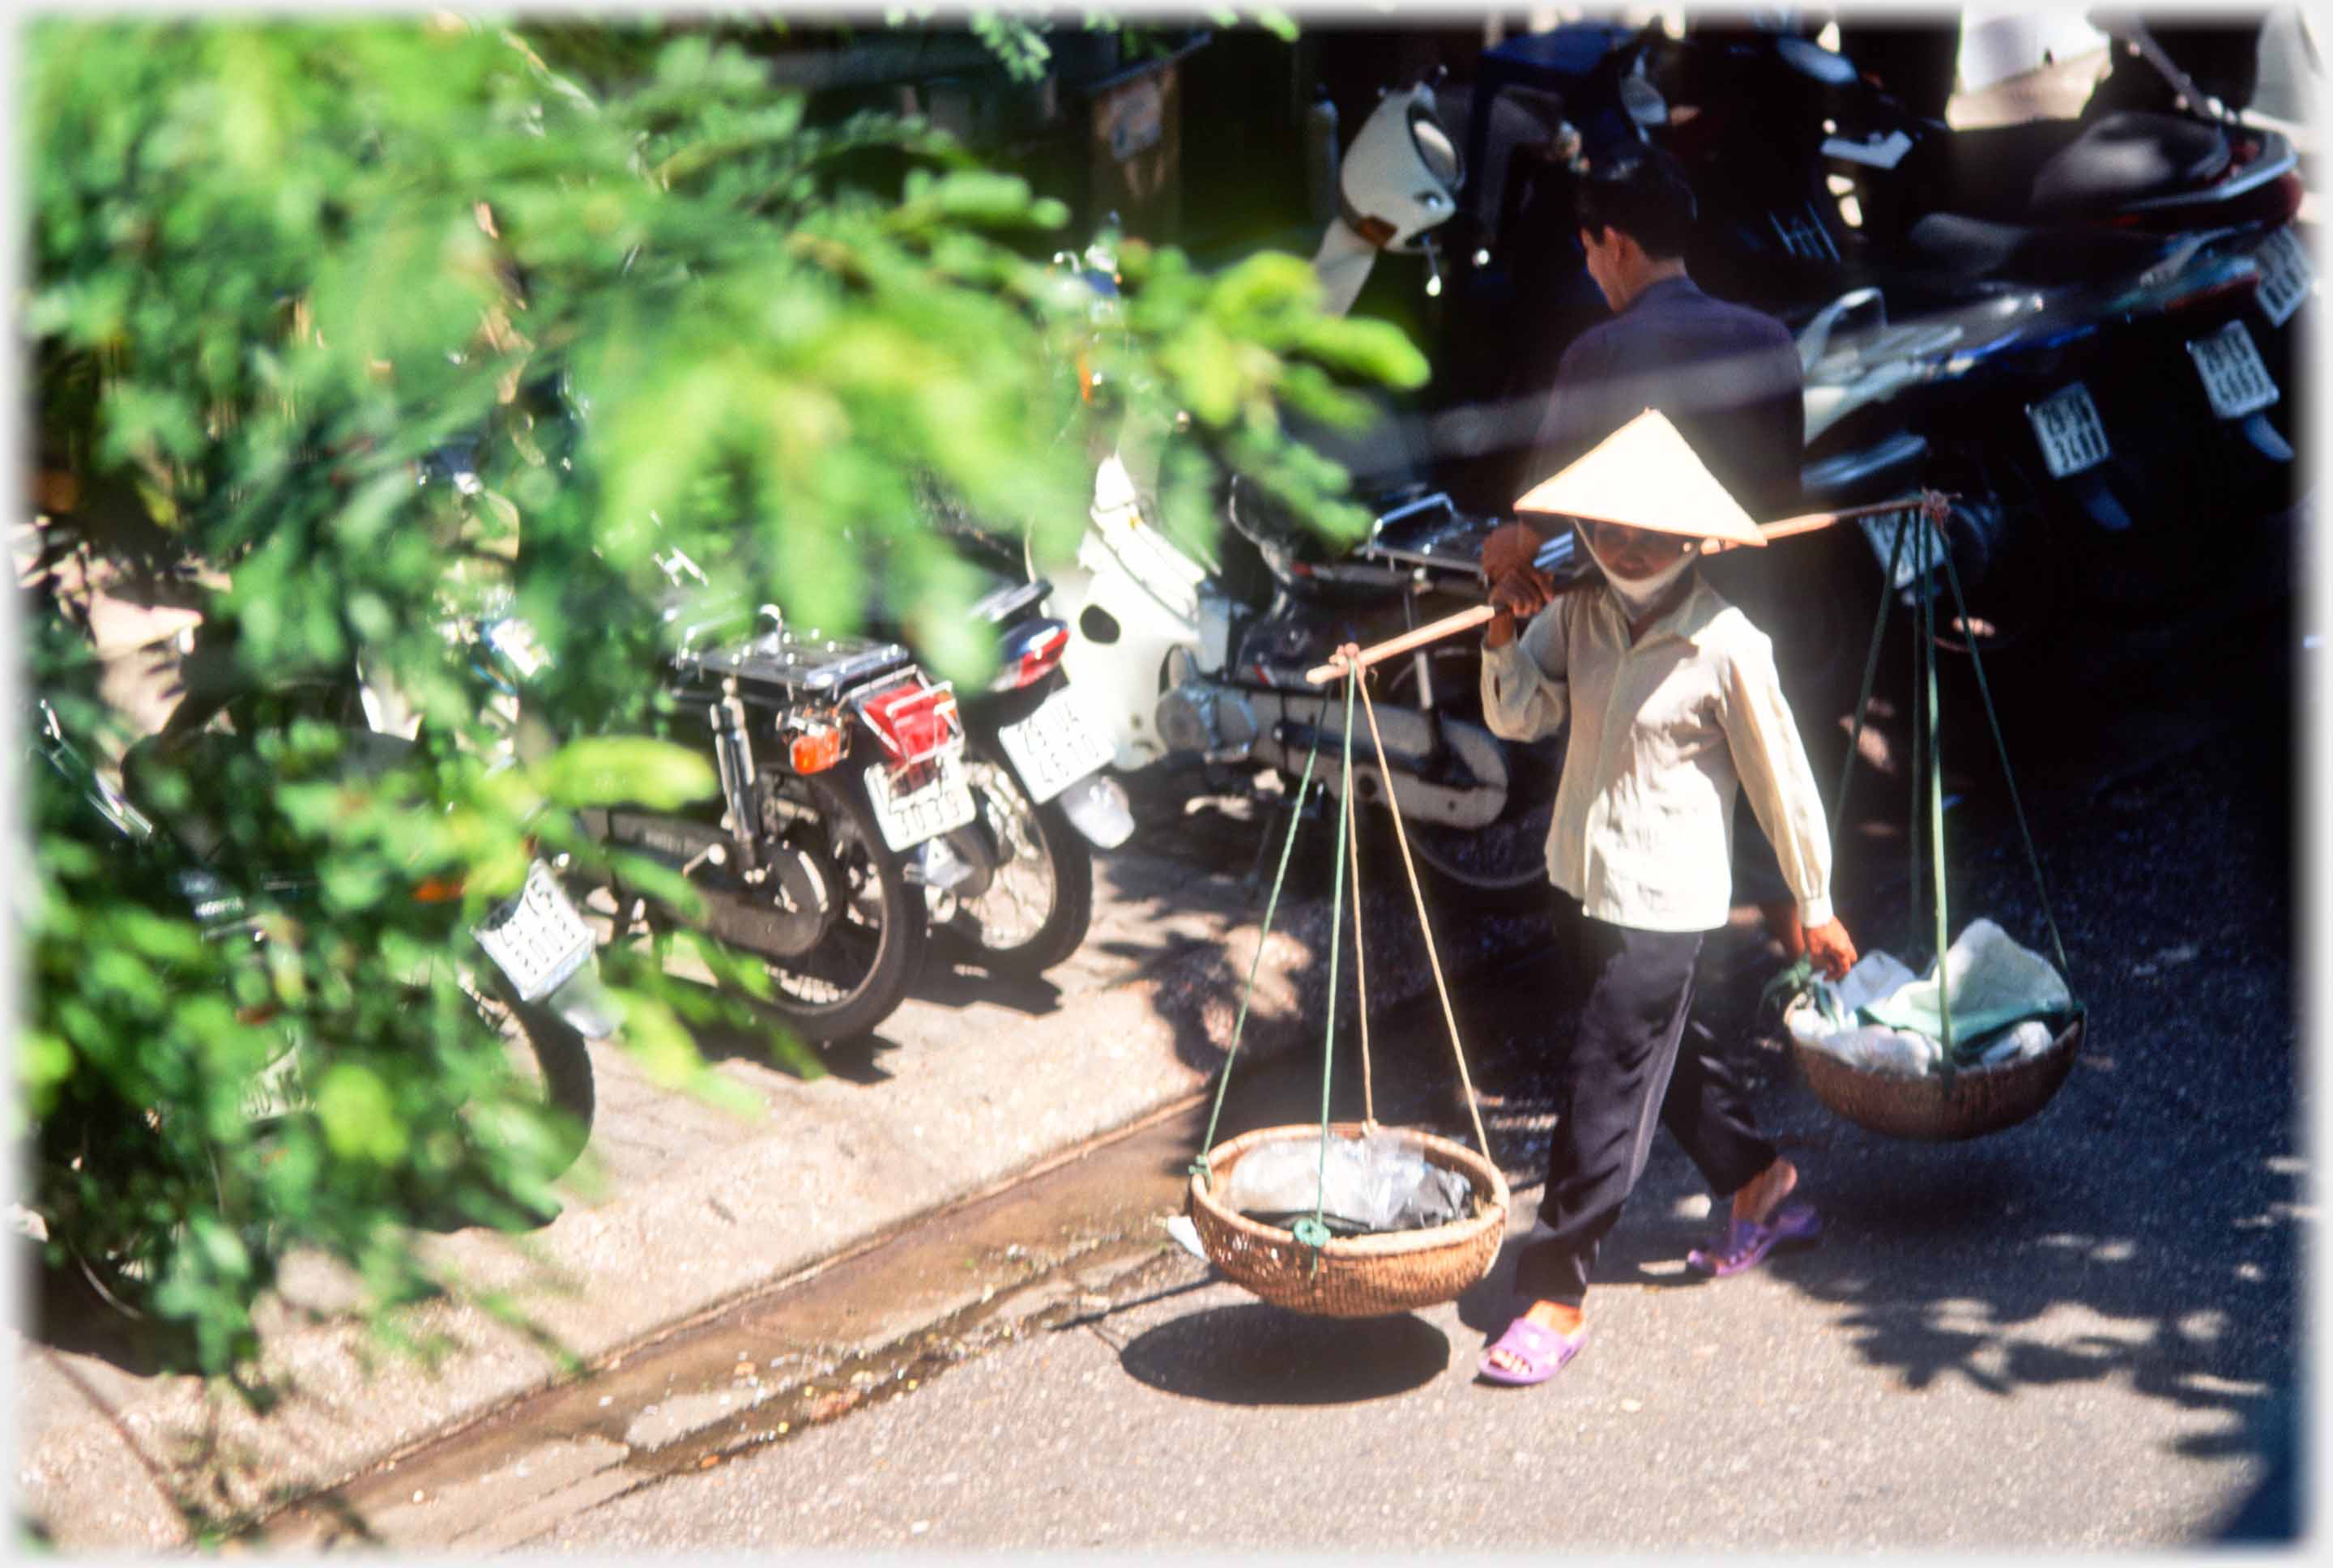 Woman walking with empty panniers beside a row of bikes under a tree.